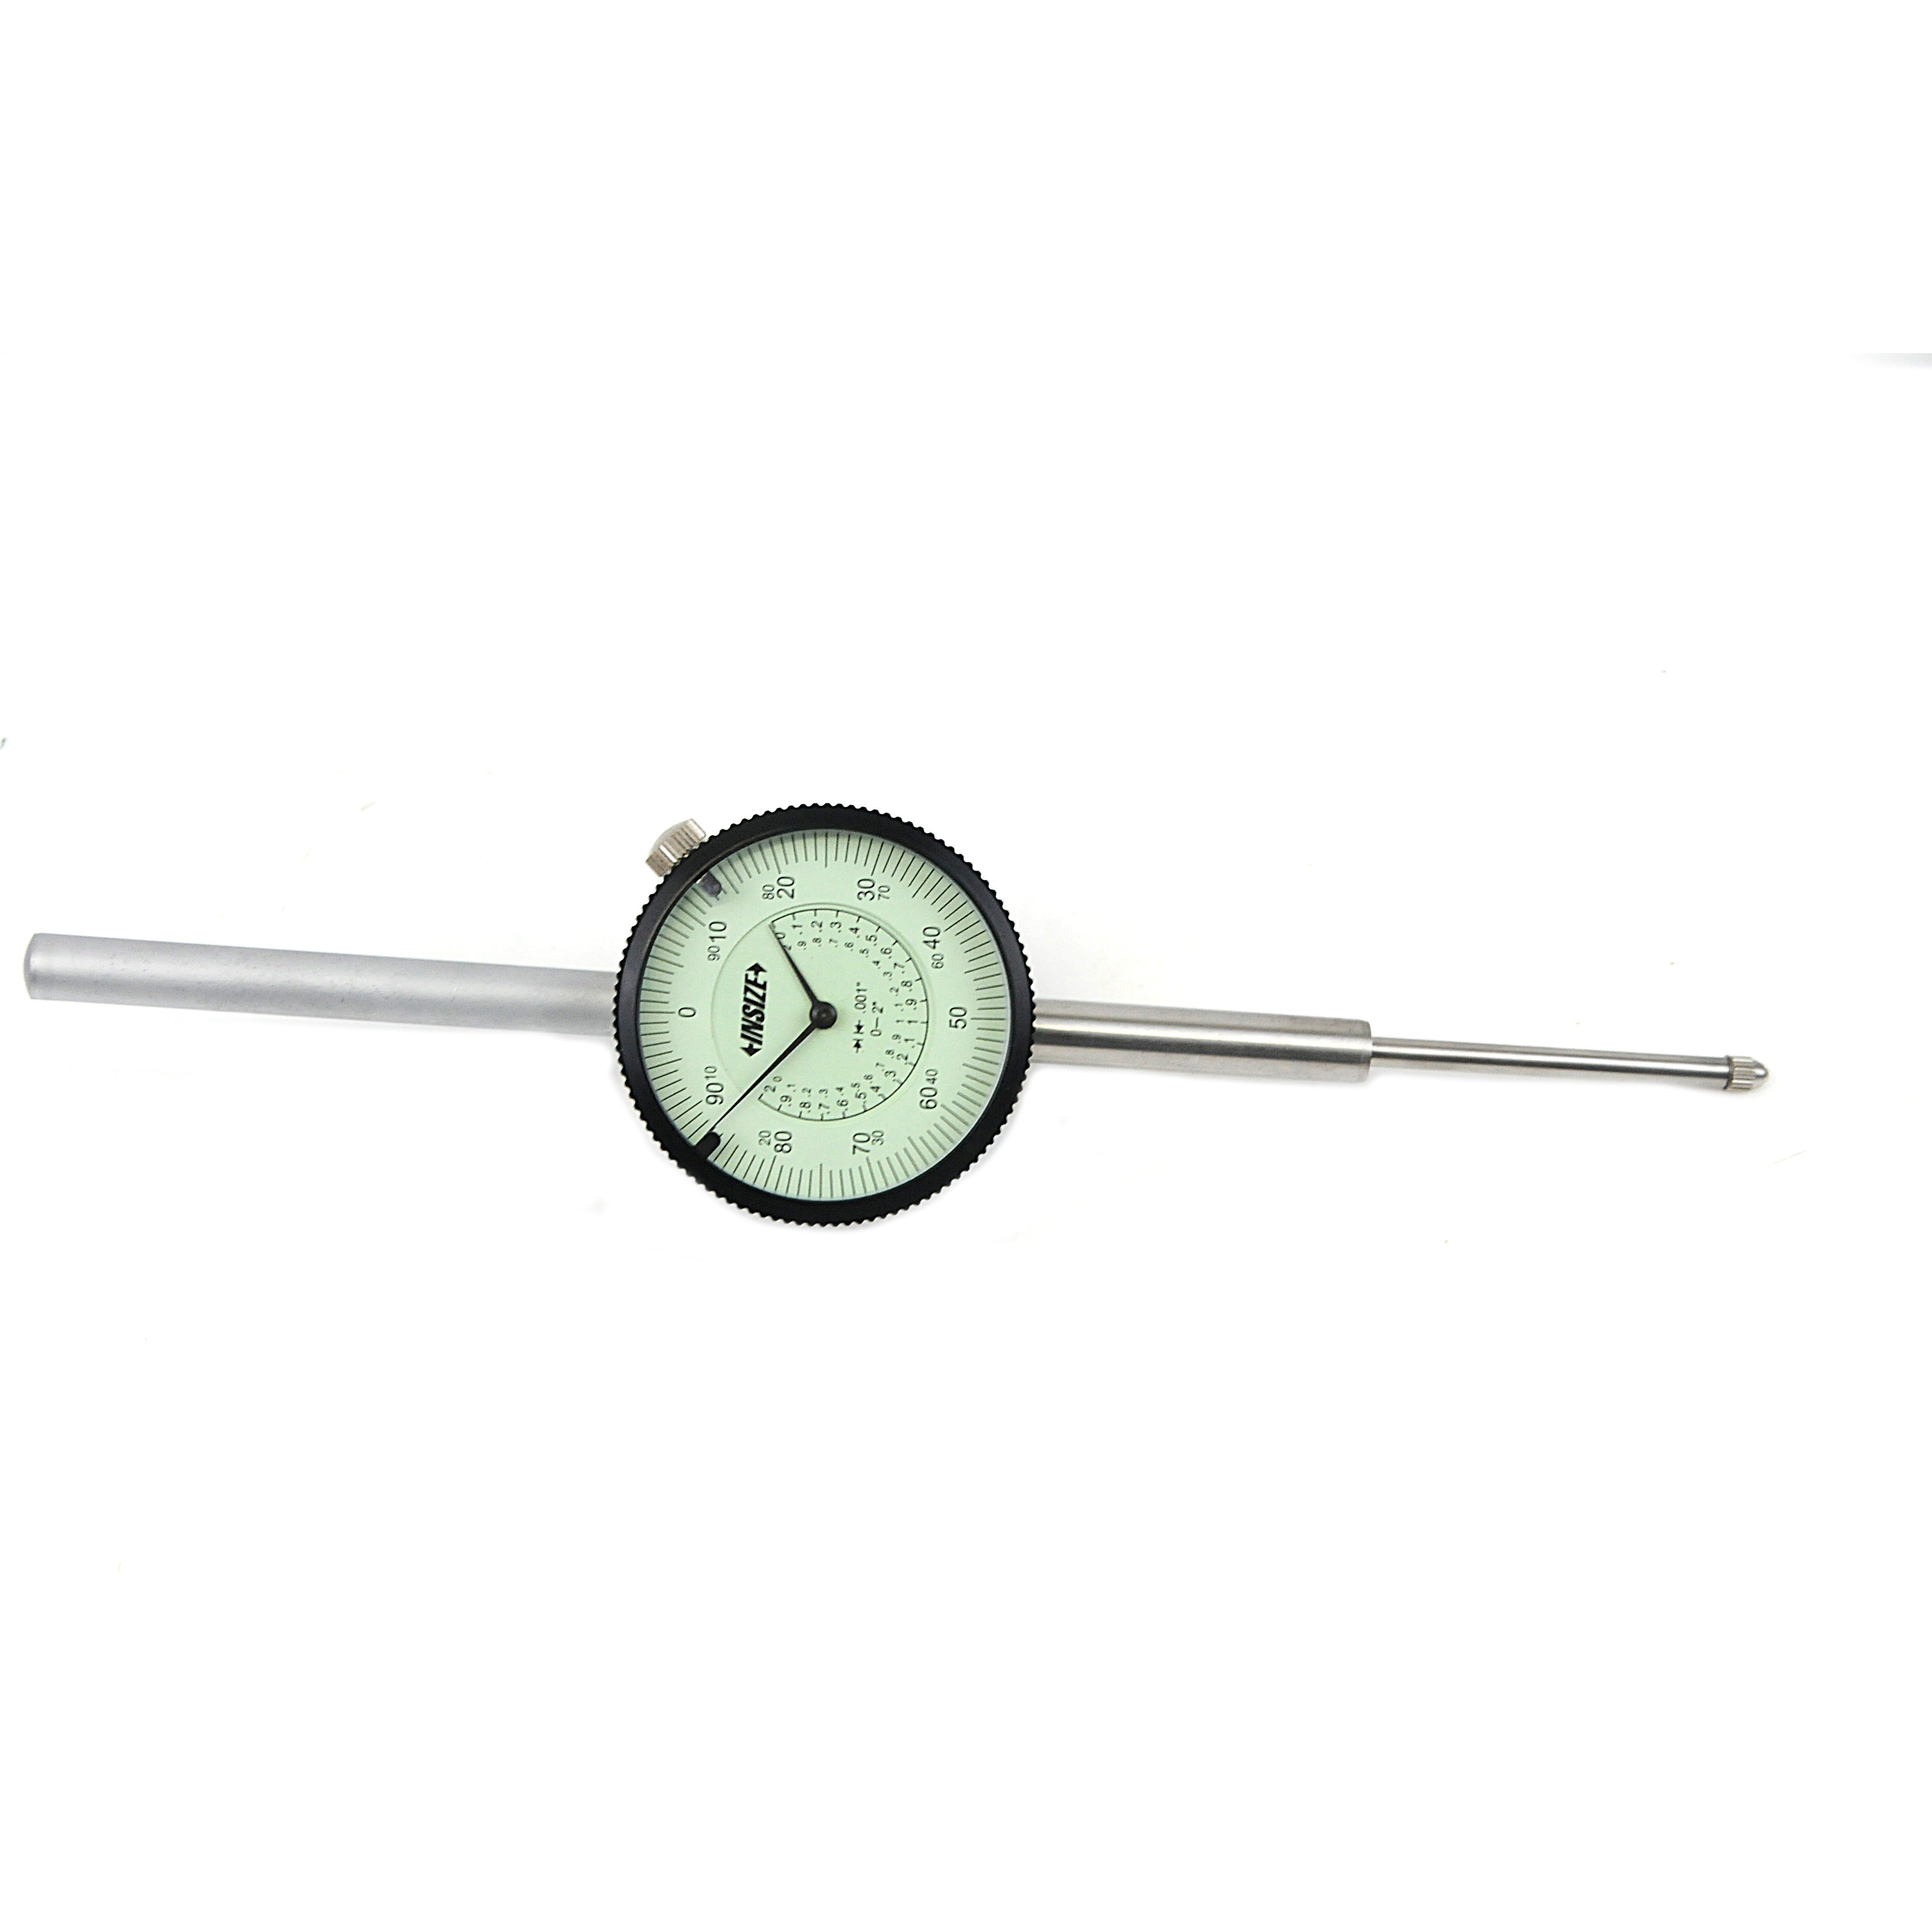 Insize Imperial Long Stroke Dial Indicator 2" 2326-2